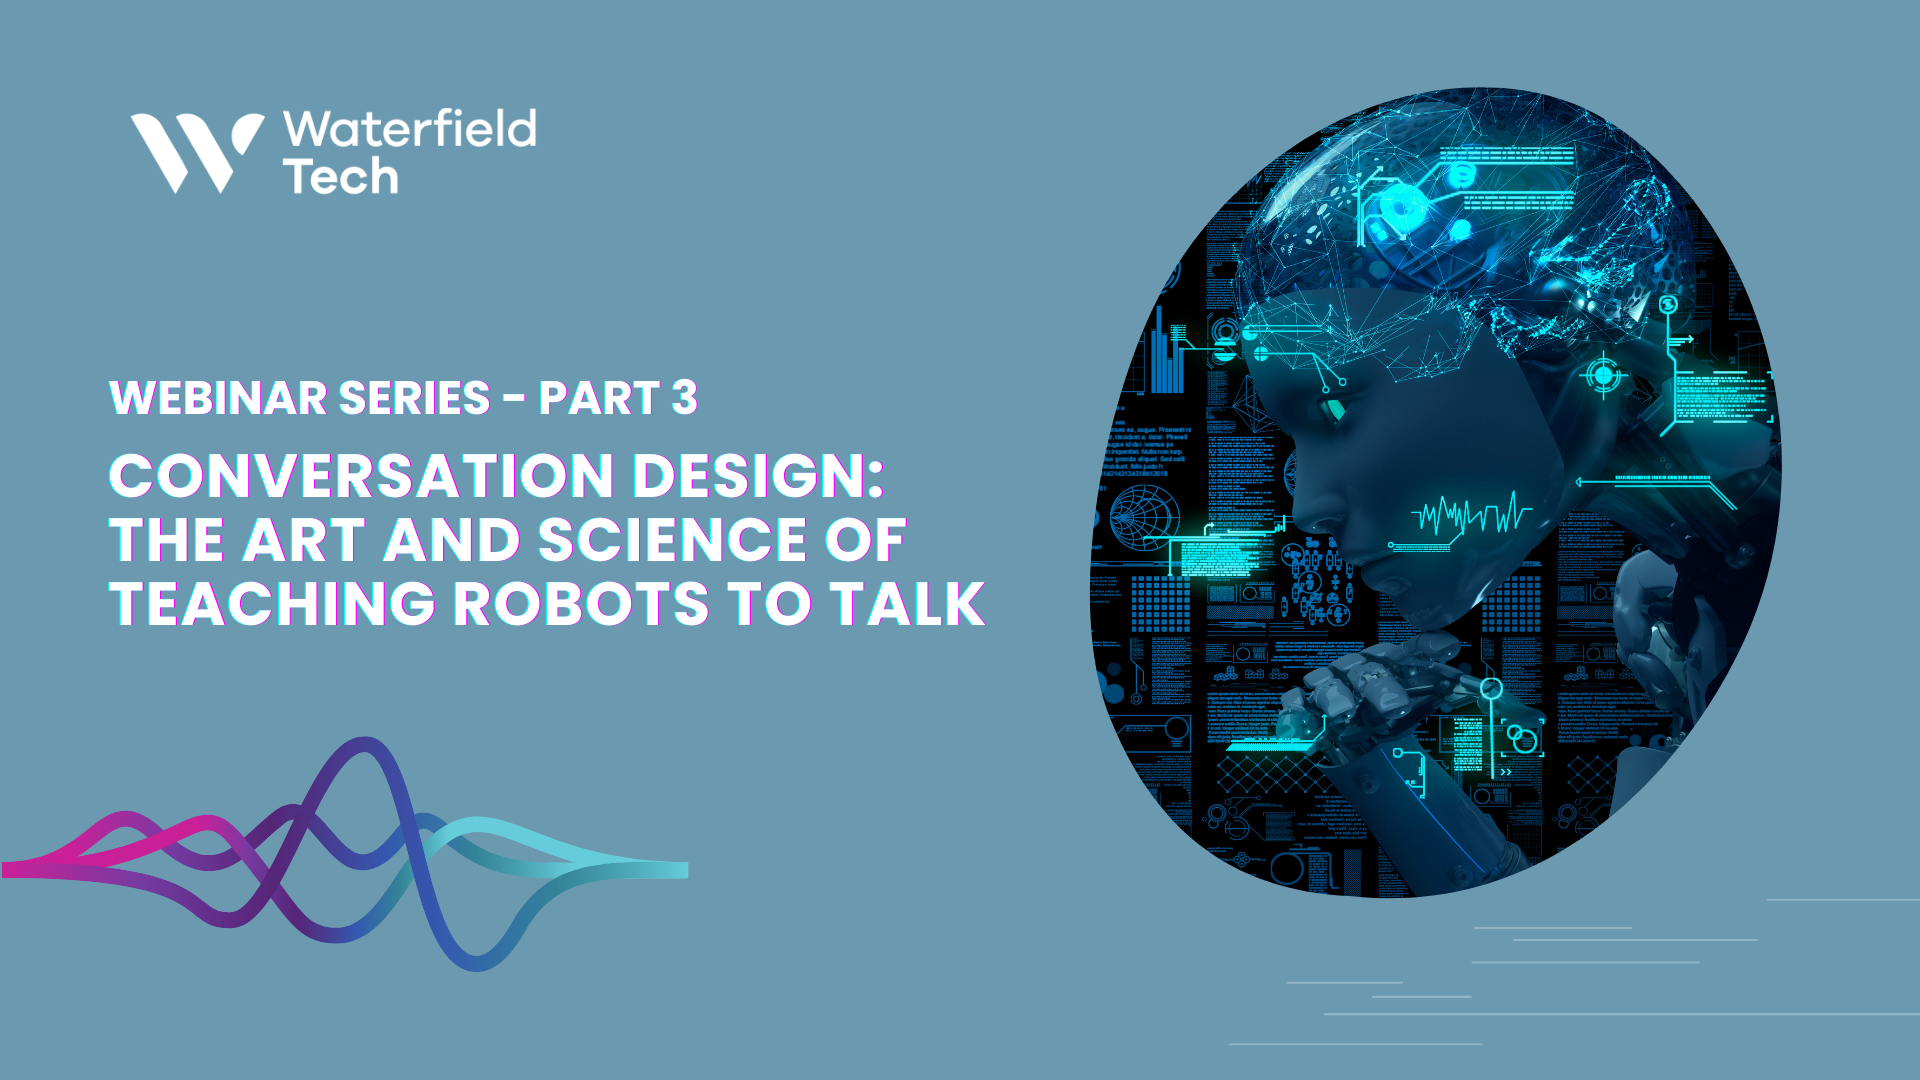 [Webinar Series] Part 3: Conversation Design: The Art and Science of Teaching Robots to Talk